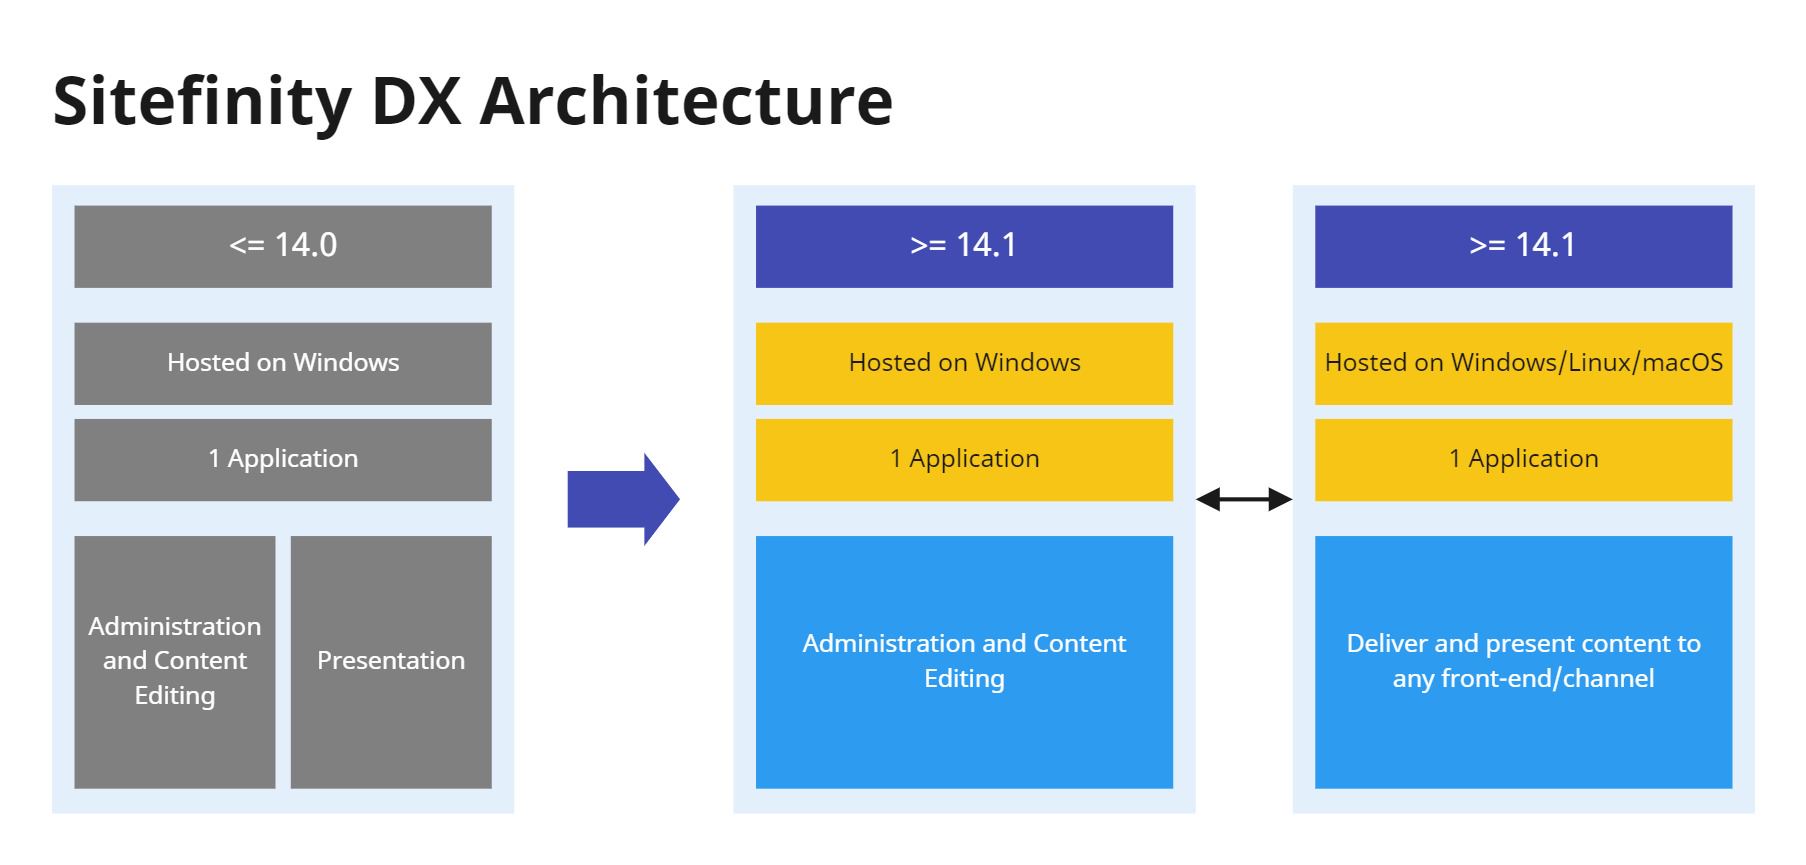 Sitefinity DX Architecture